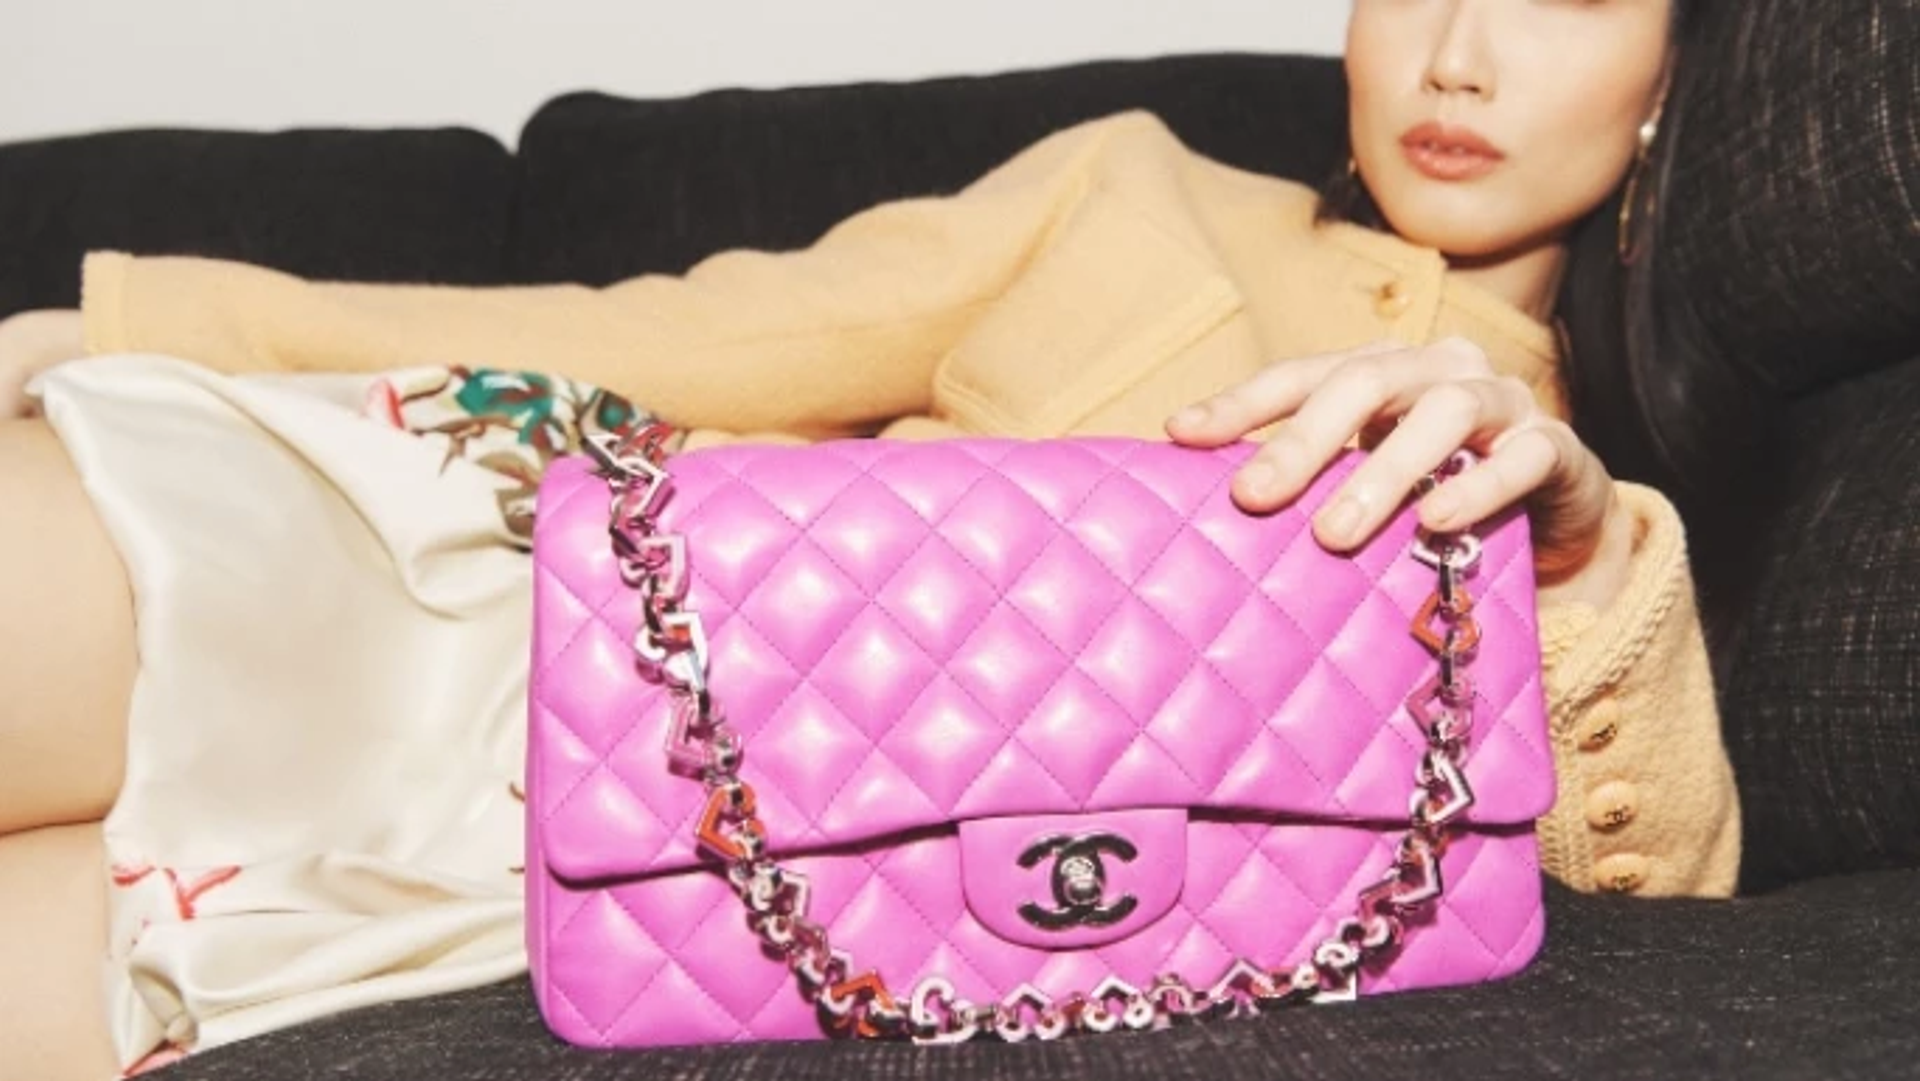 Woman laying down modelling a quilted purple Chanel handbag